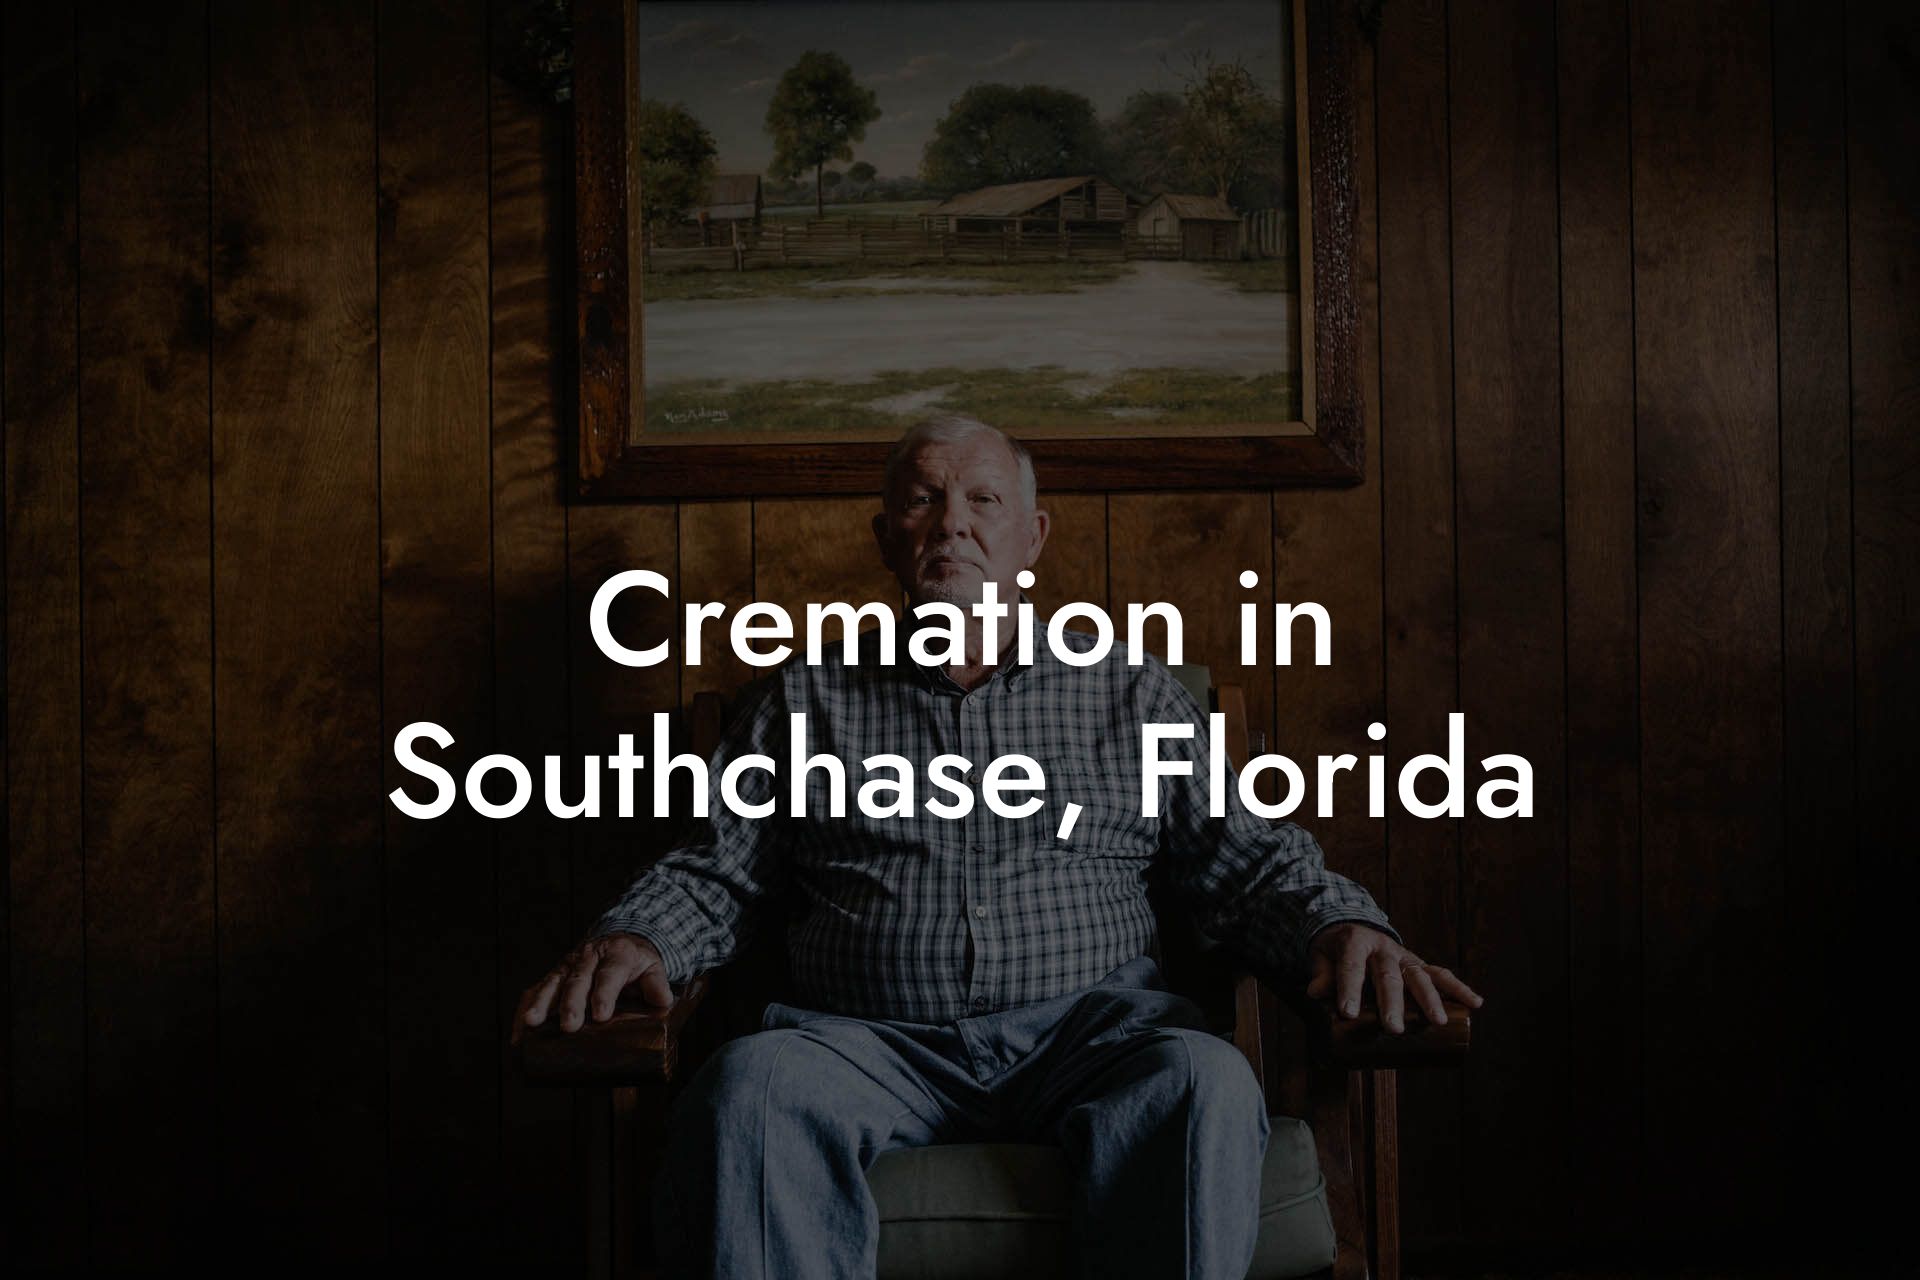 Cremation in Southchase, Florida